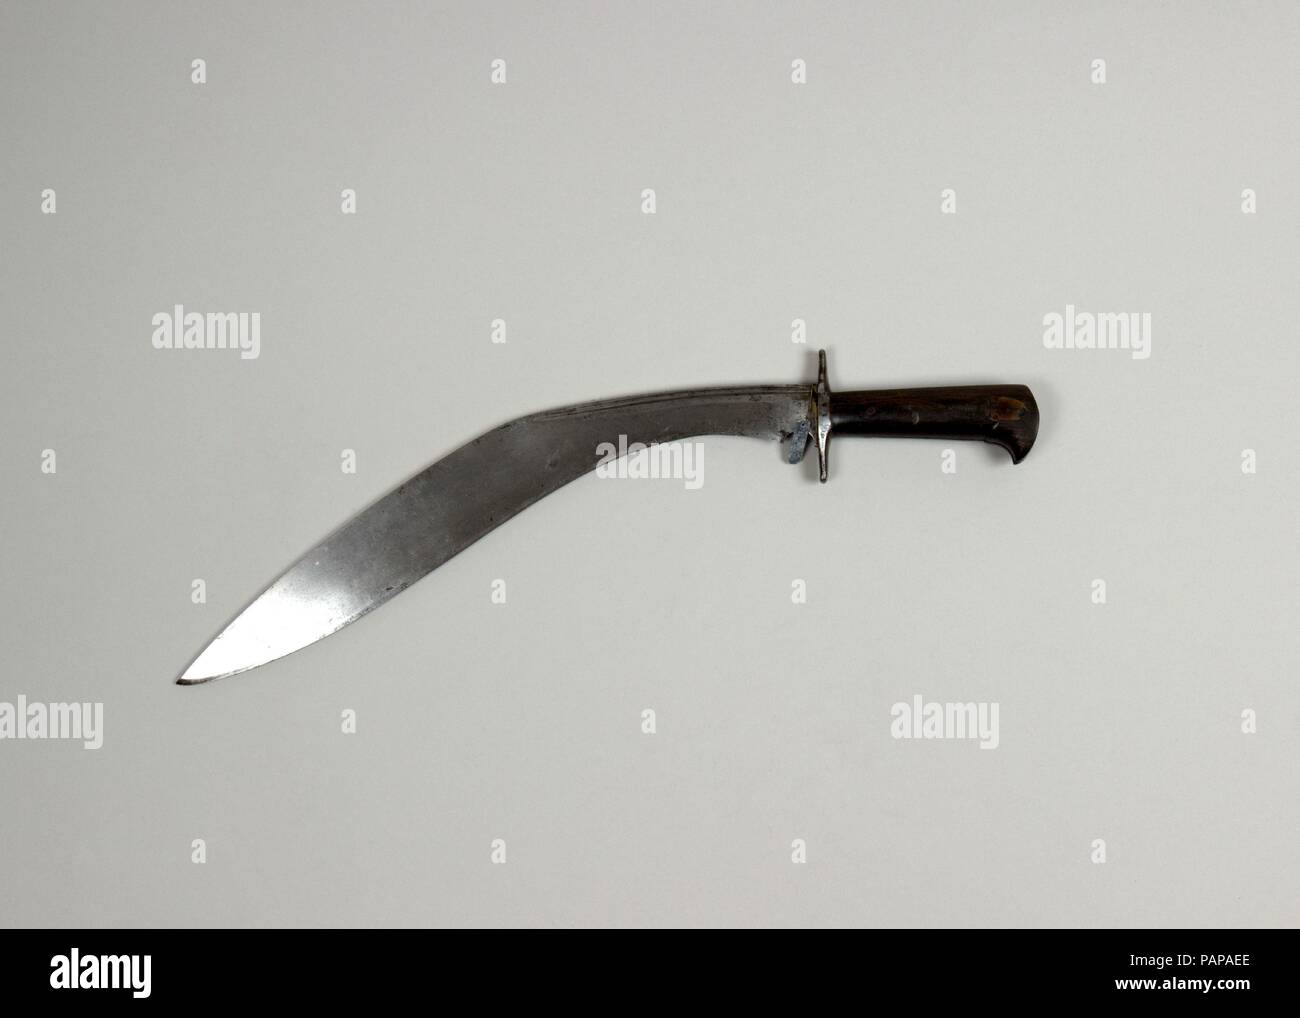 Knife (Kukri). Culture: Indian or Nepalese, Gurkha. Dimensions: L. 18 in. (45.7 cm); W. 2 3/4 in. (7 cm); Wt. 1 lb. 5.7 oz. (615.2 g). Date: 19th century. Museum: Metropolitan Museum of Art, New York, USA. Stock Photo